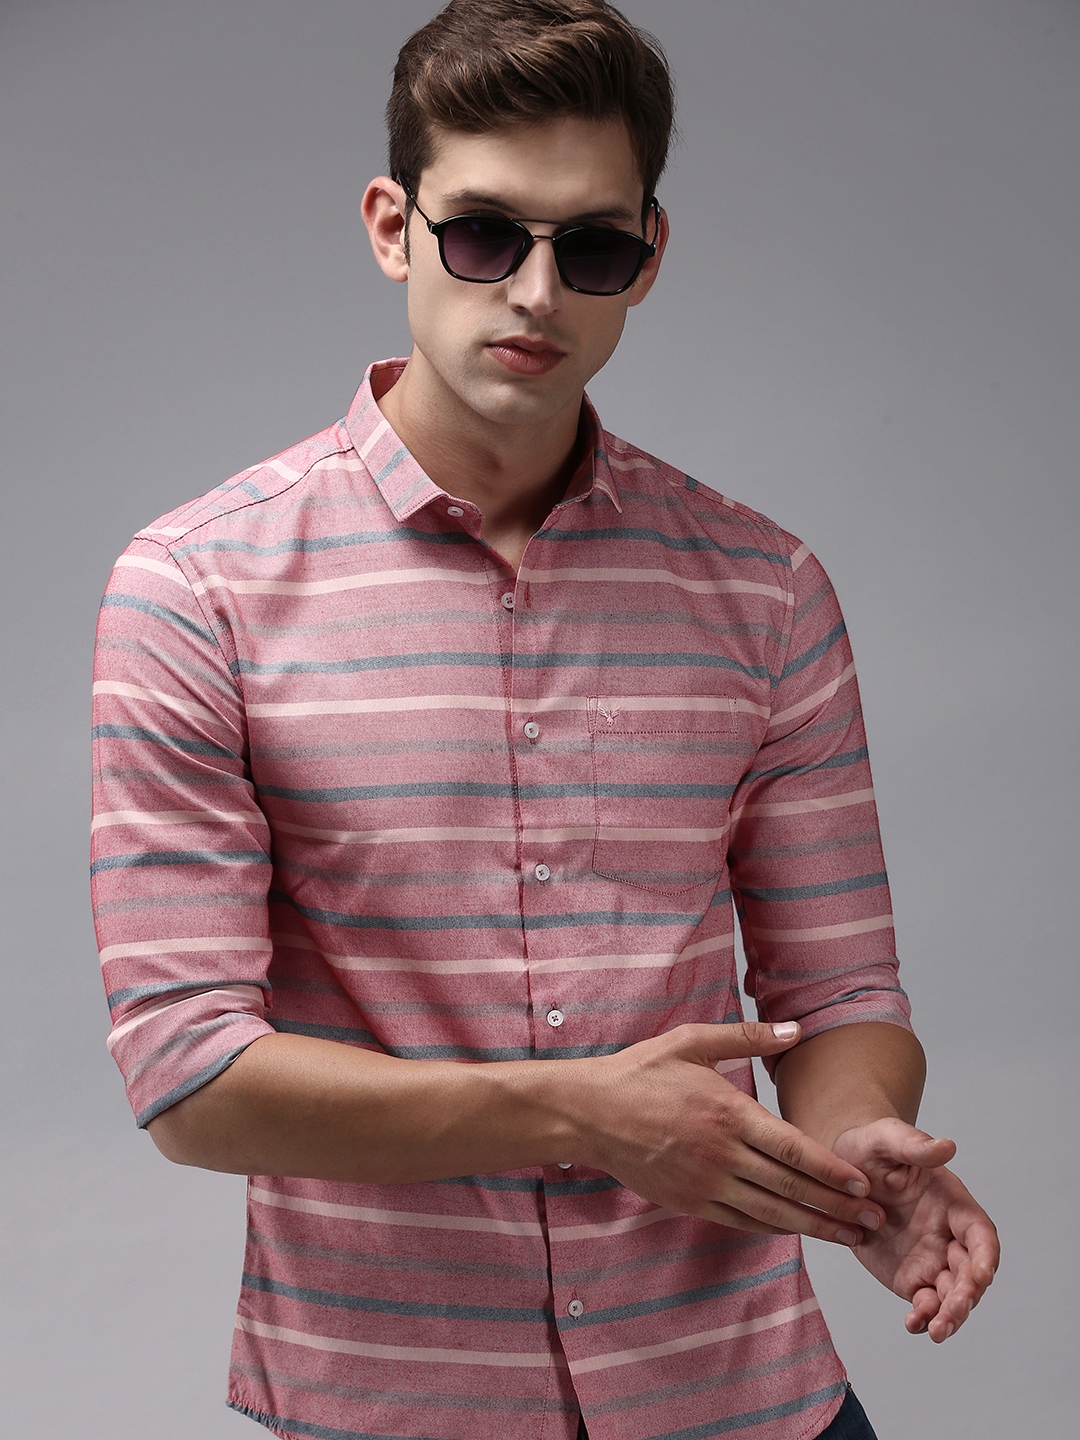 Men's Pink Cotton Striped Casual Shirts